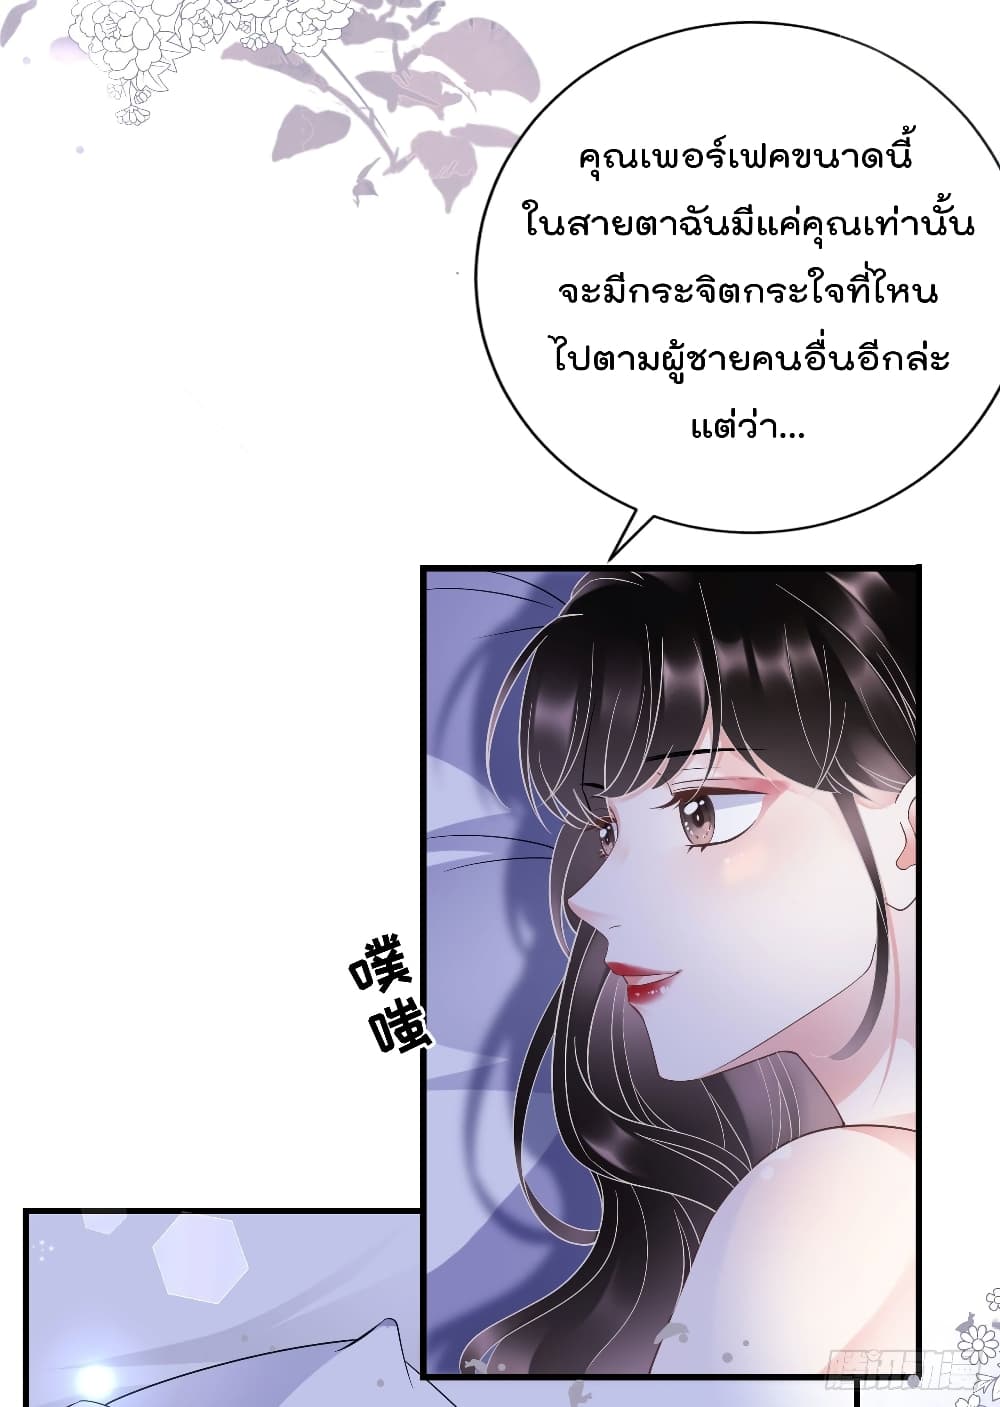 What Can the Eldest Lady Have คุณหนูใหญ่ ทำไมคุณร้ายอย่างนี้ 20-20